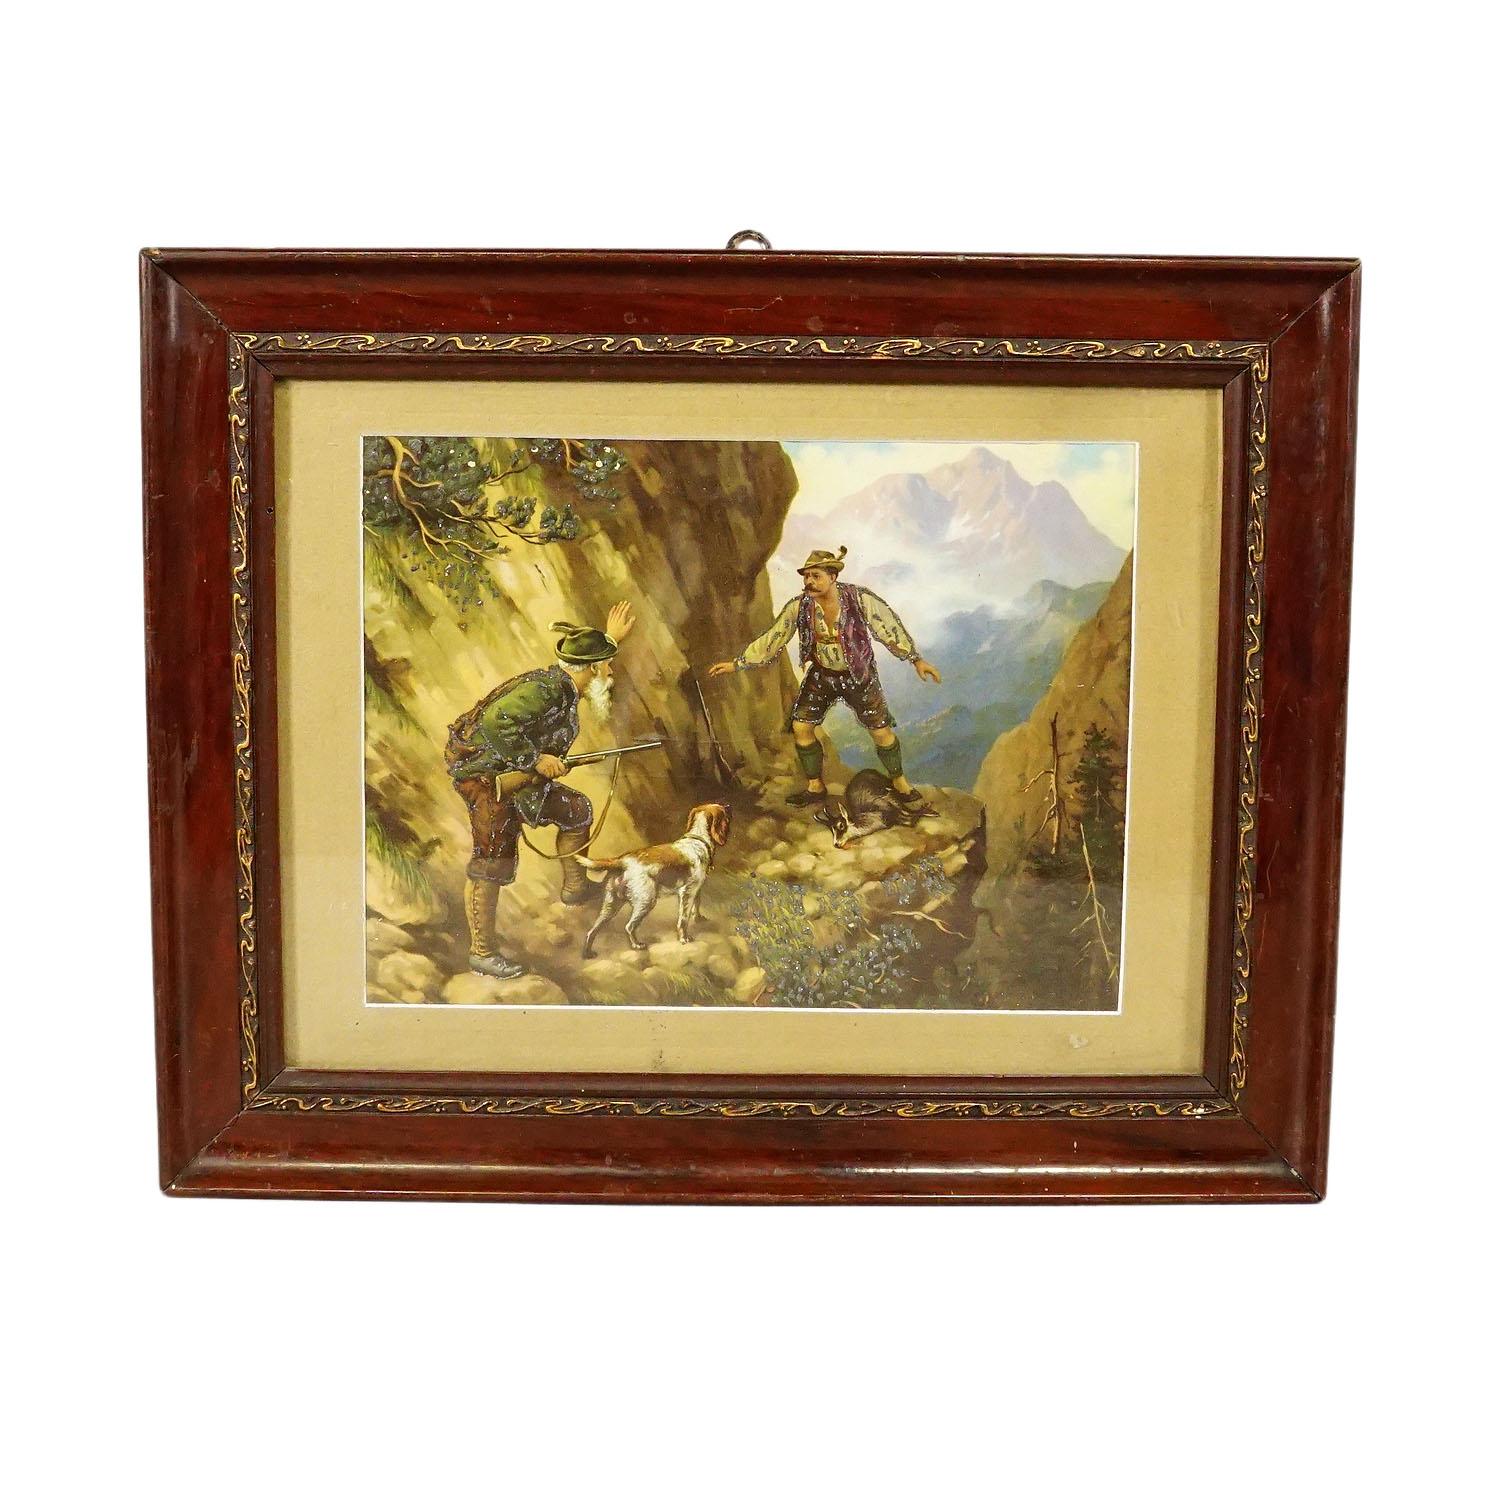 Antique Oil Print with Dramatic Poacher Scene after Josef Ringeisen

A colorful oil print depicting a dramatic poaching scenery in the Bavarian alps. A poacher is caught in the act by the hunter and his staghound. To better emphasize the details,